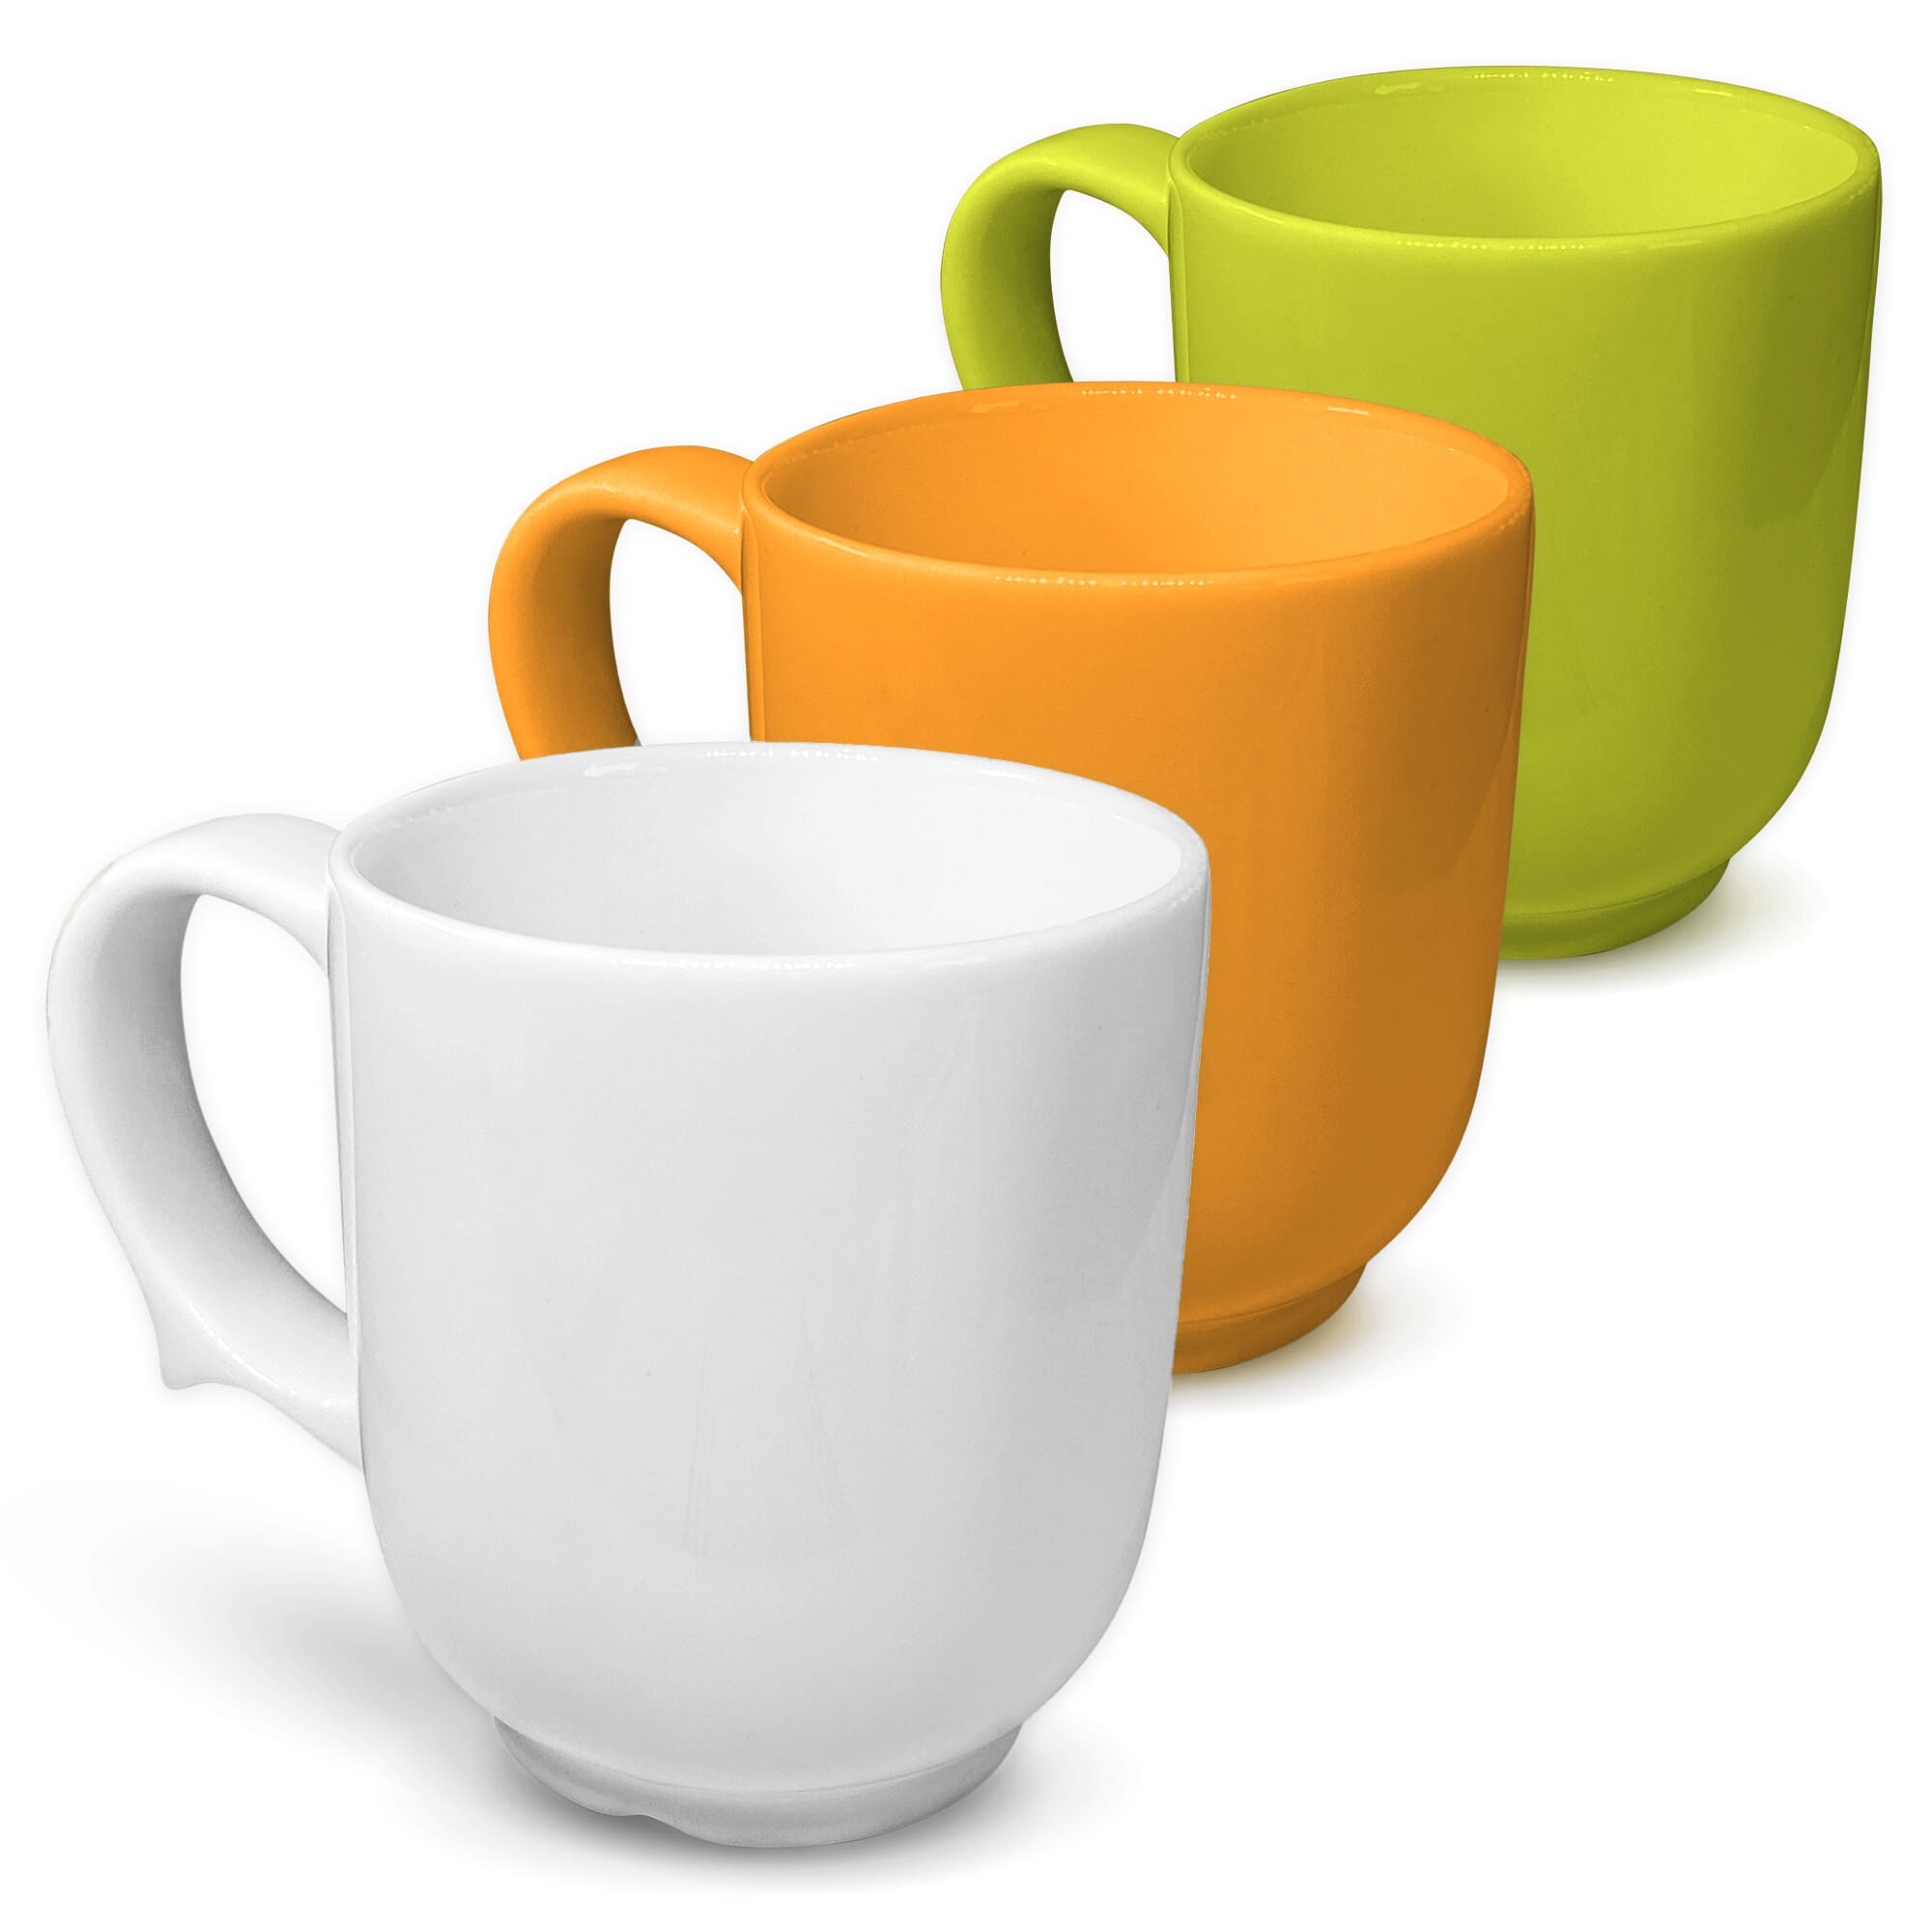 Non Spill Cups & Mugs for Adults - Complete Care Shop